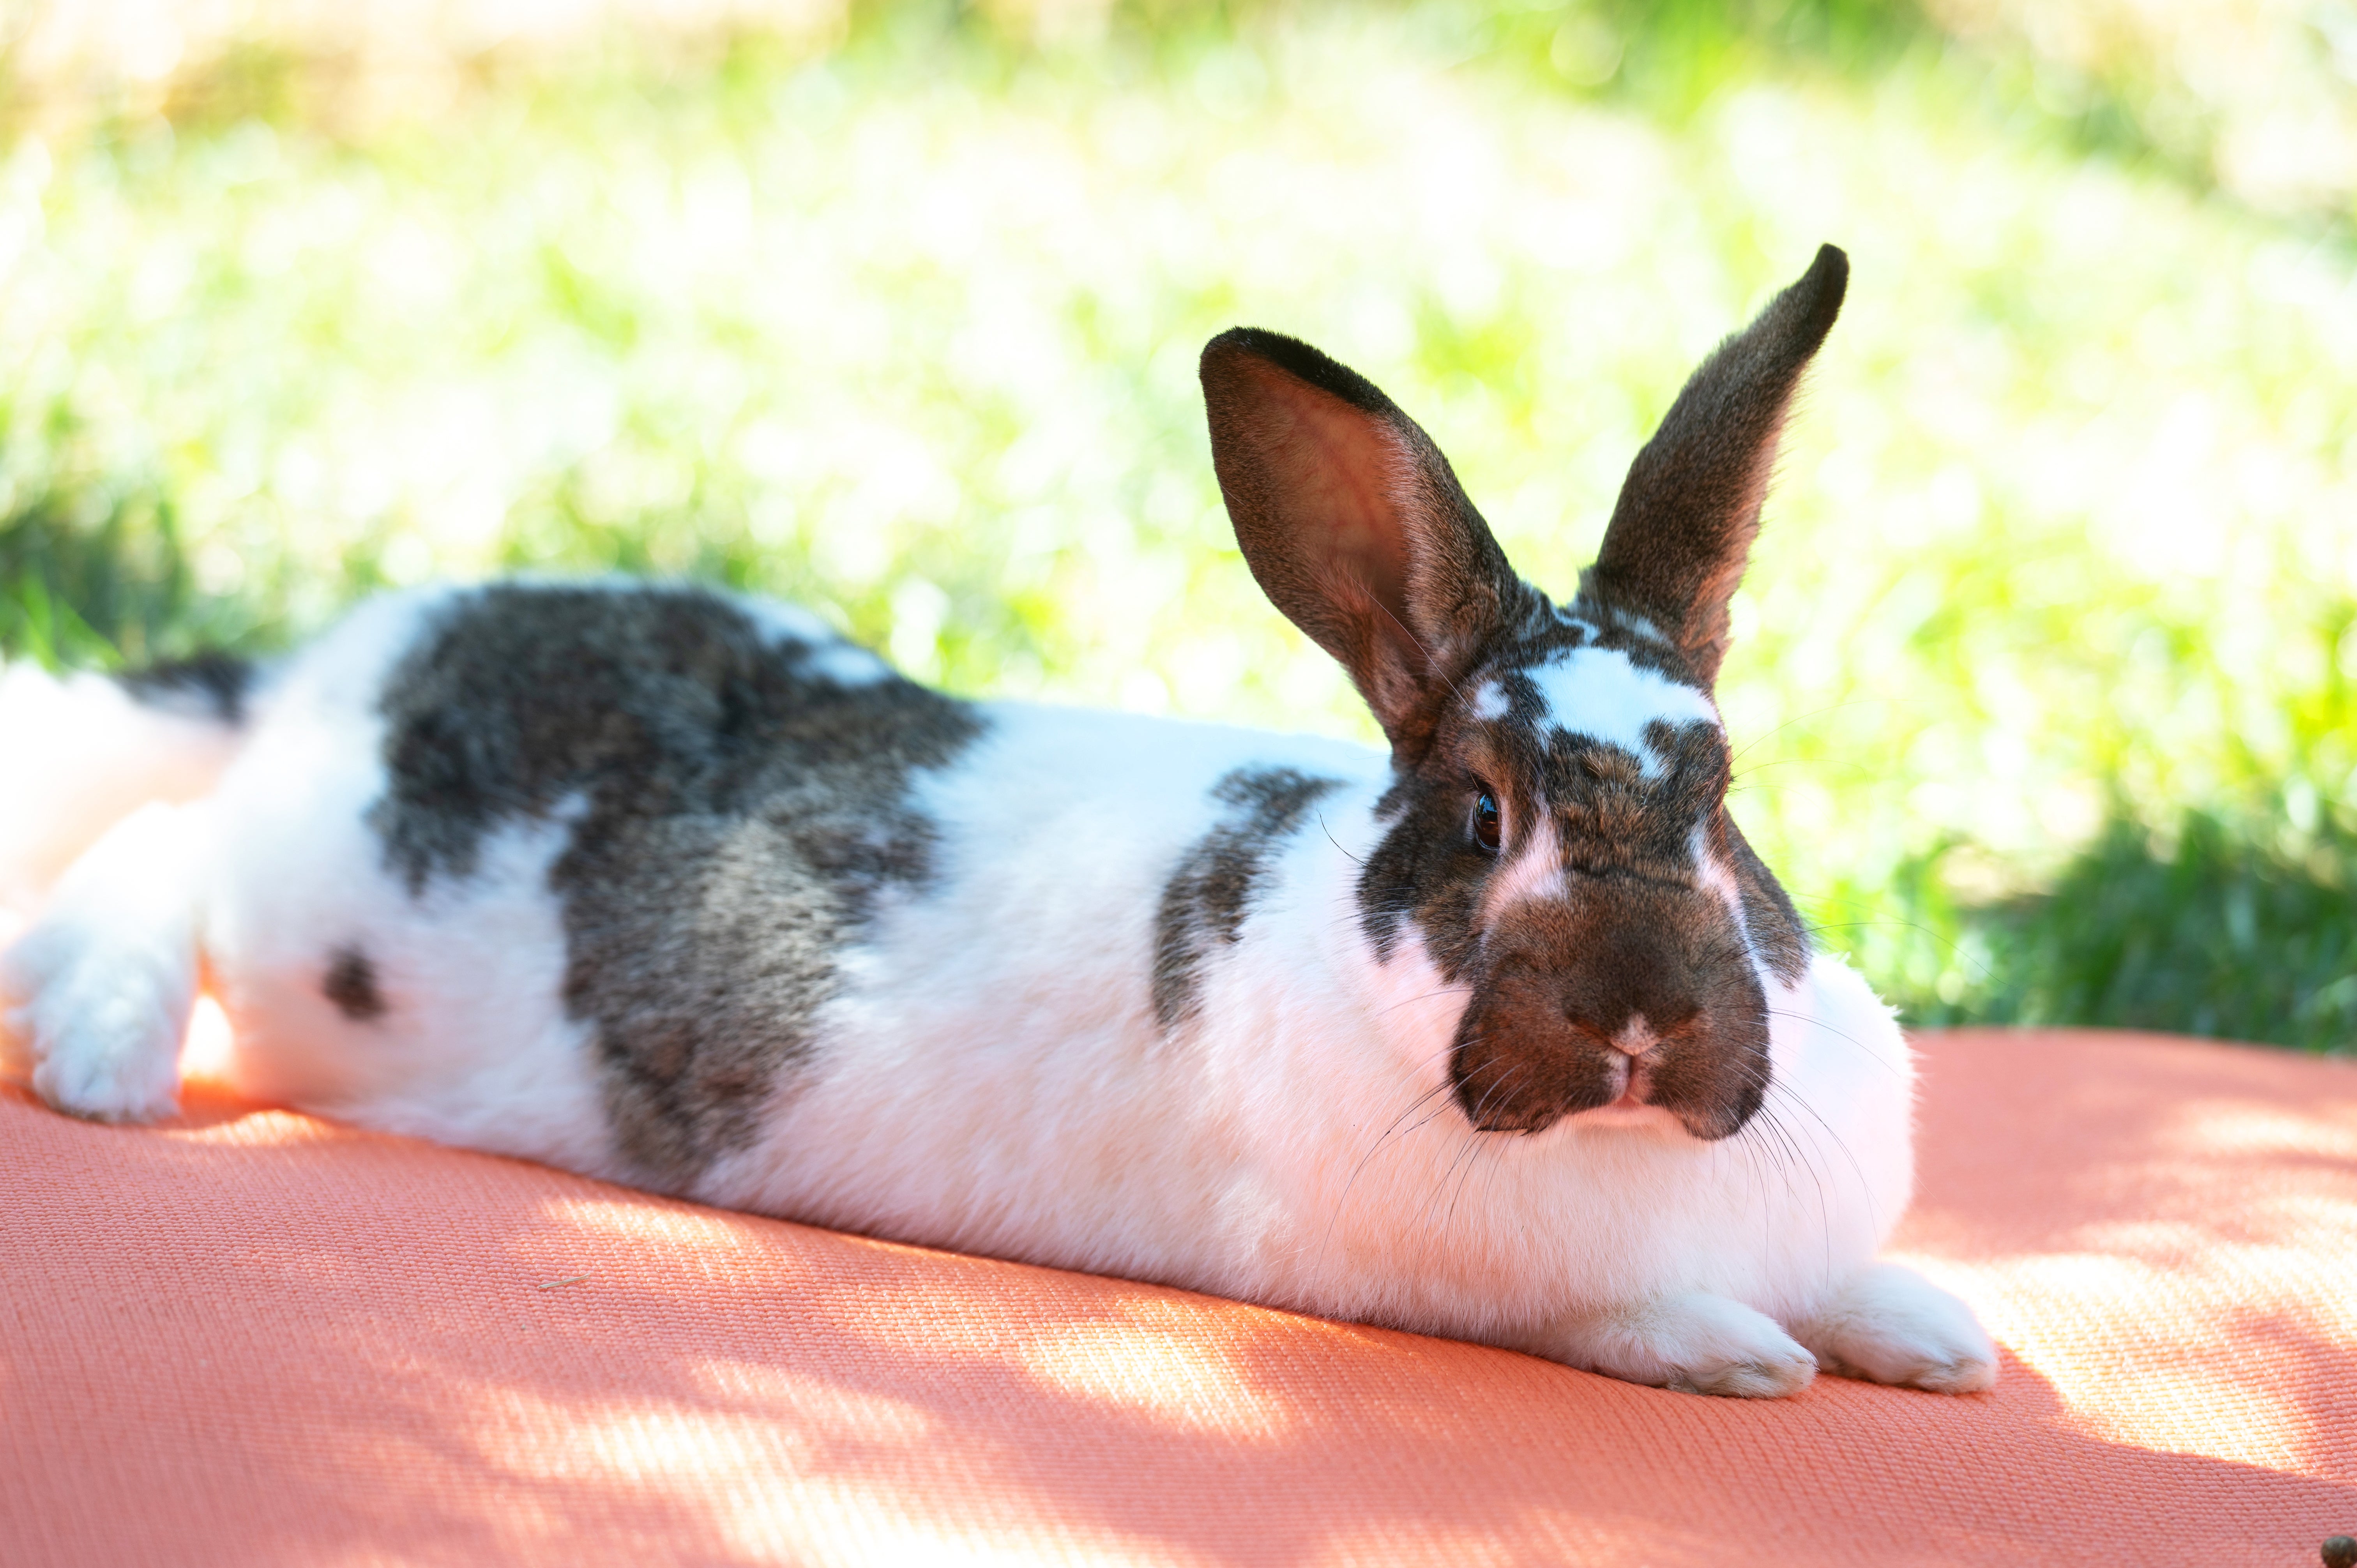 Happy bunny resting in the shade in a grassy spot